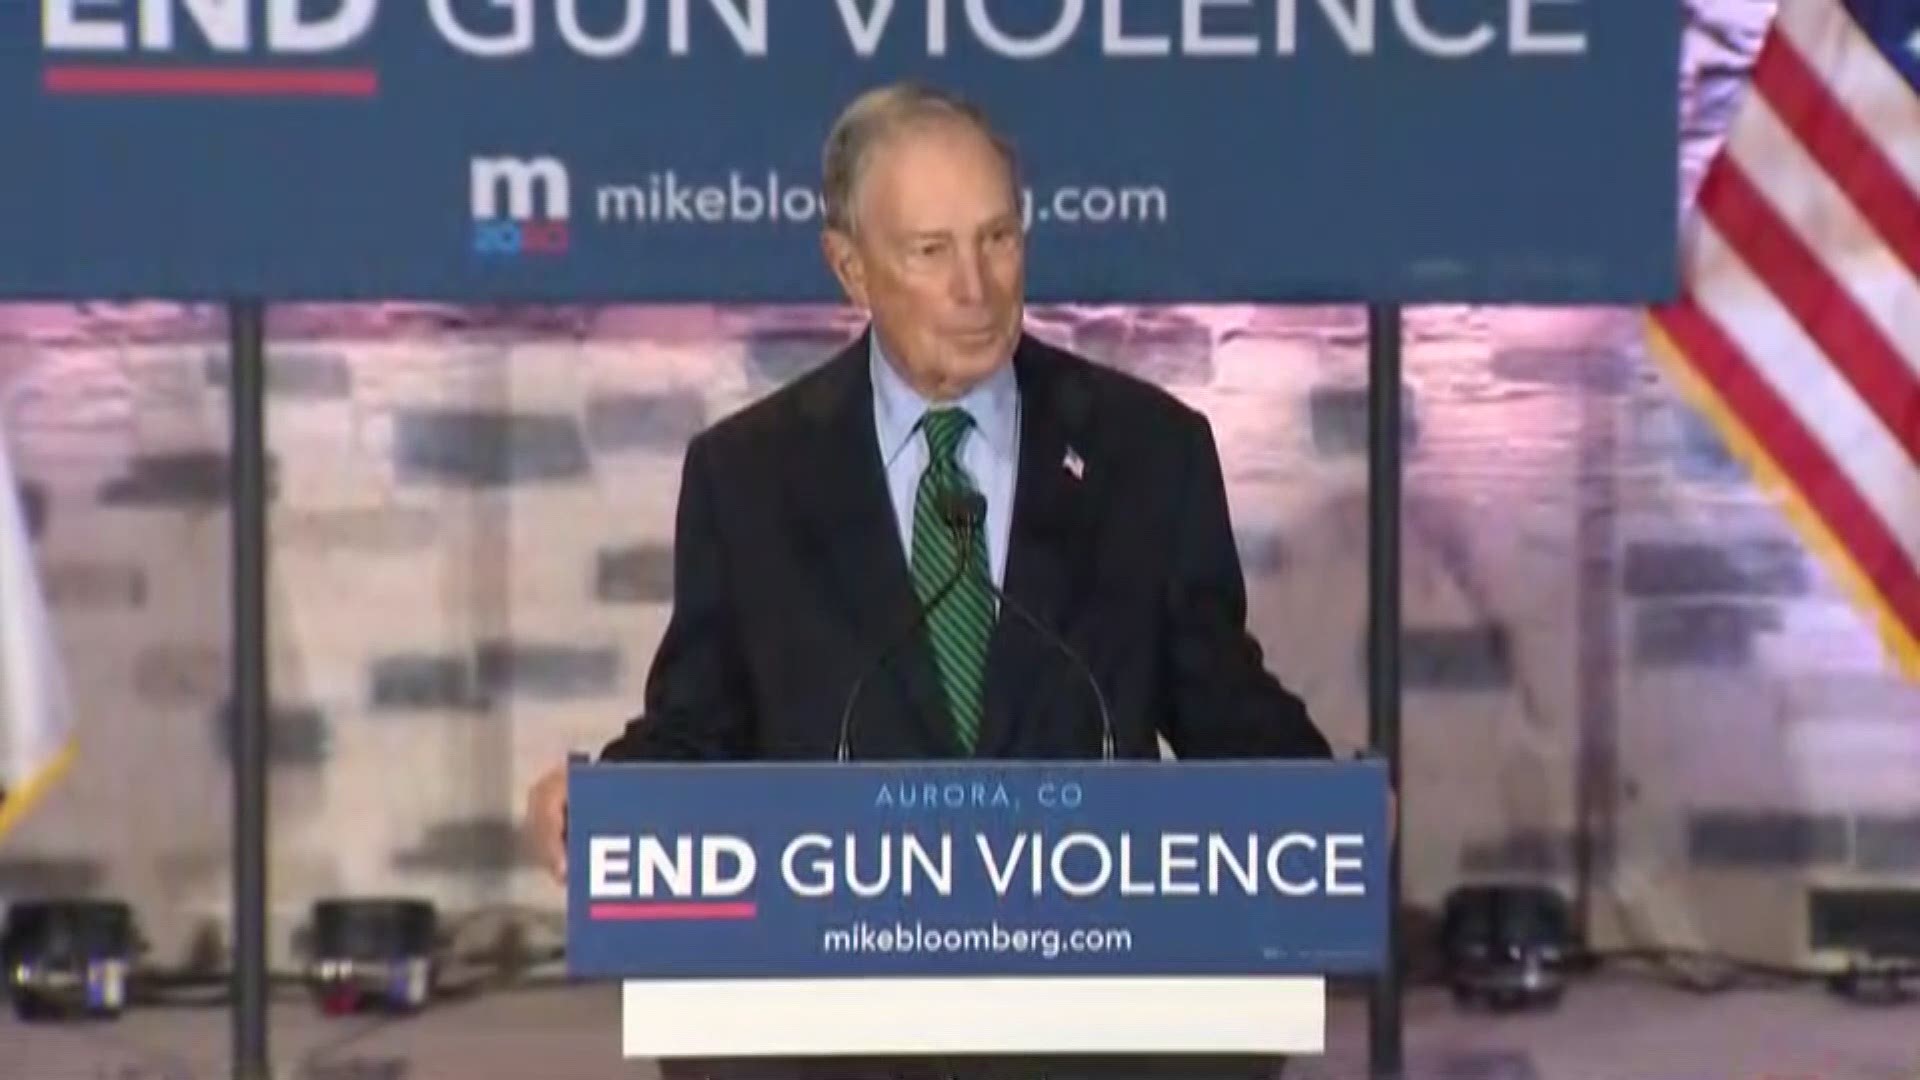 Democratic contender for president Michael Bloomberg revealed his gun control policy in Aurora on Thursday.